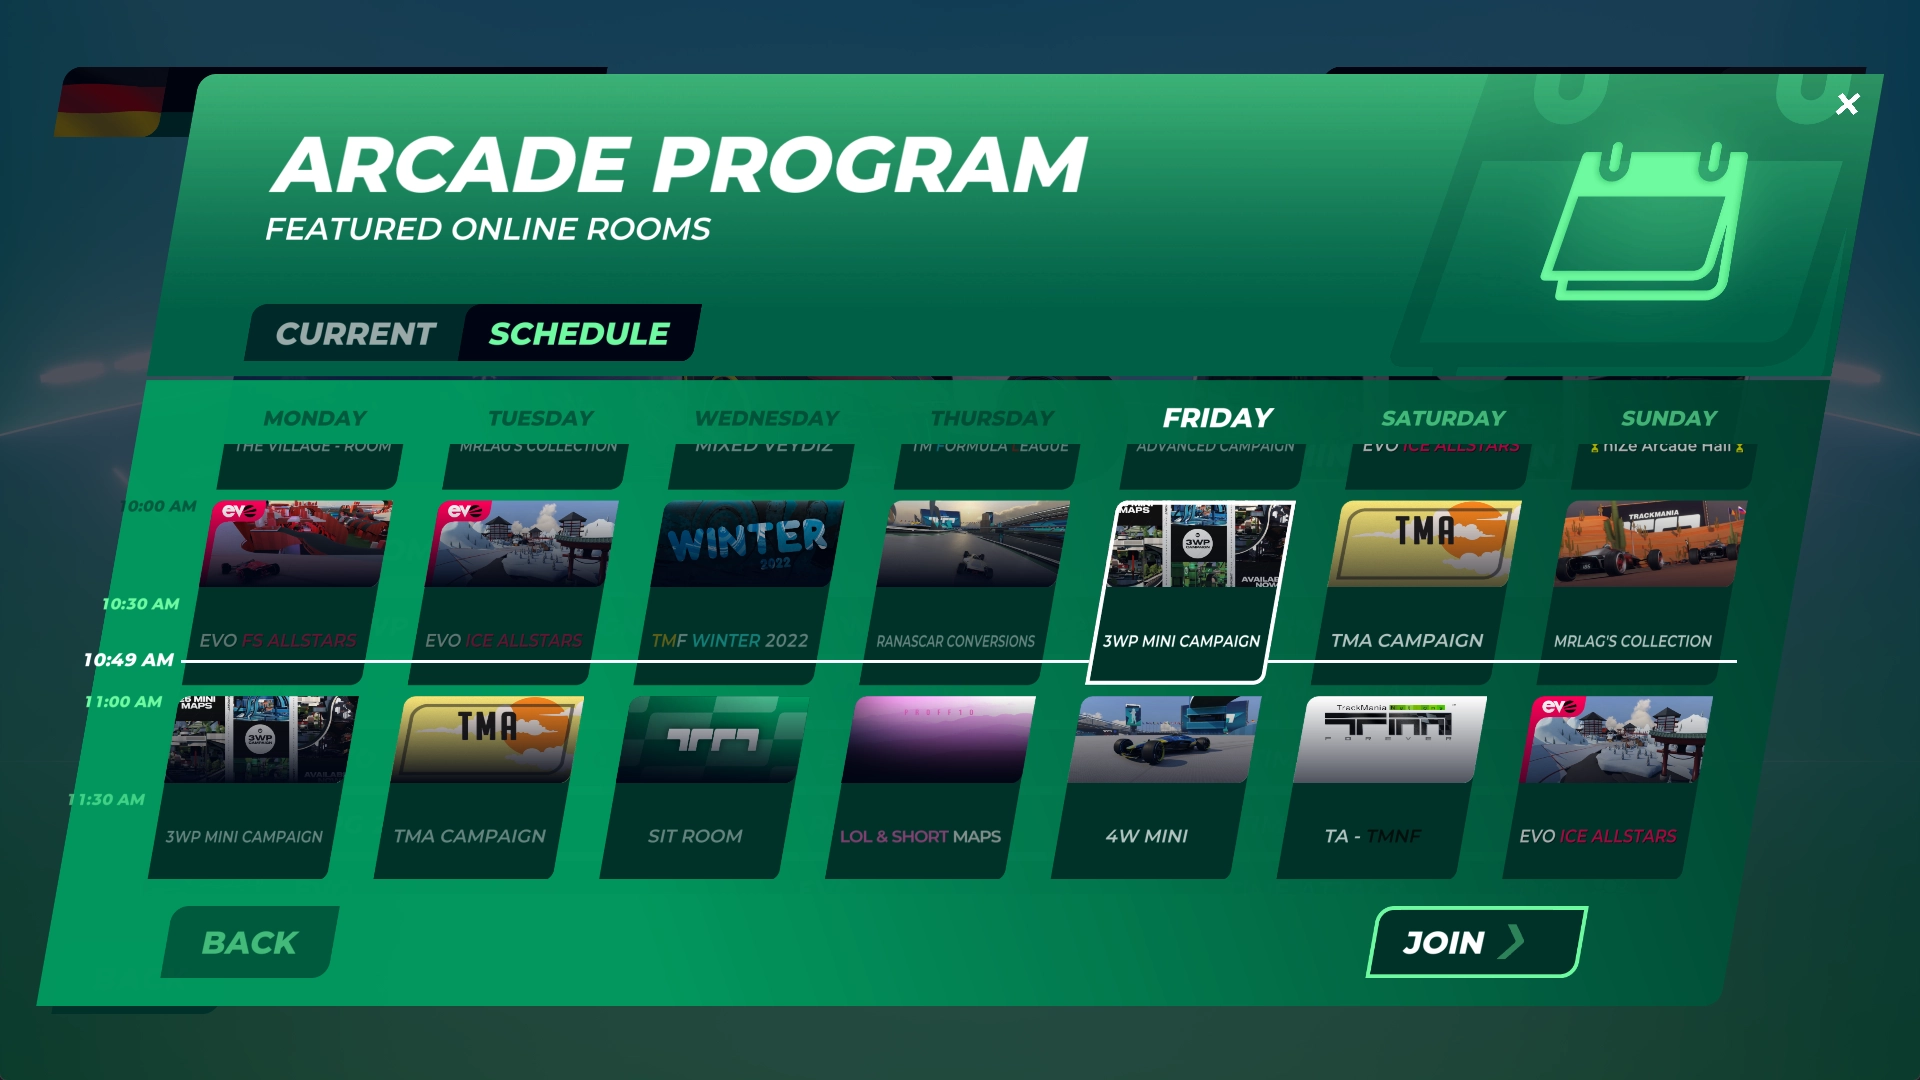 An example of the Arcade Program schedule